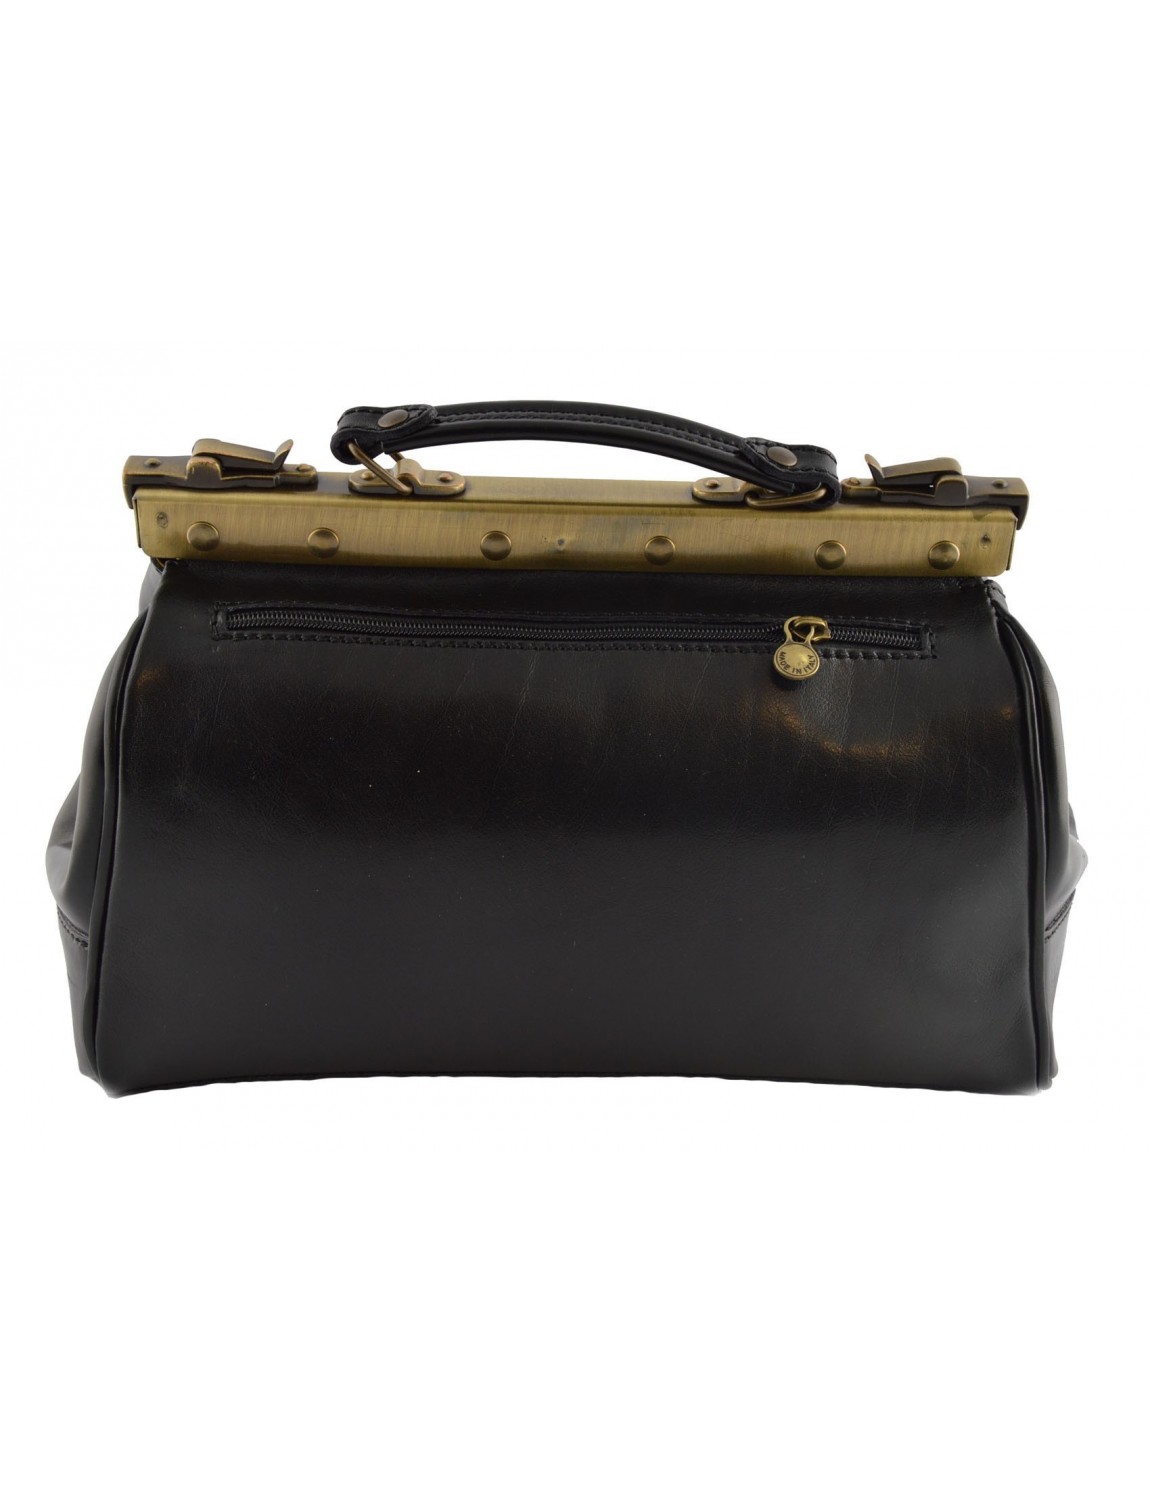 The Old America leather doctor's bag fascinates with its timeless style and elegance.